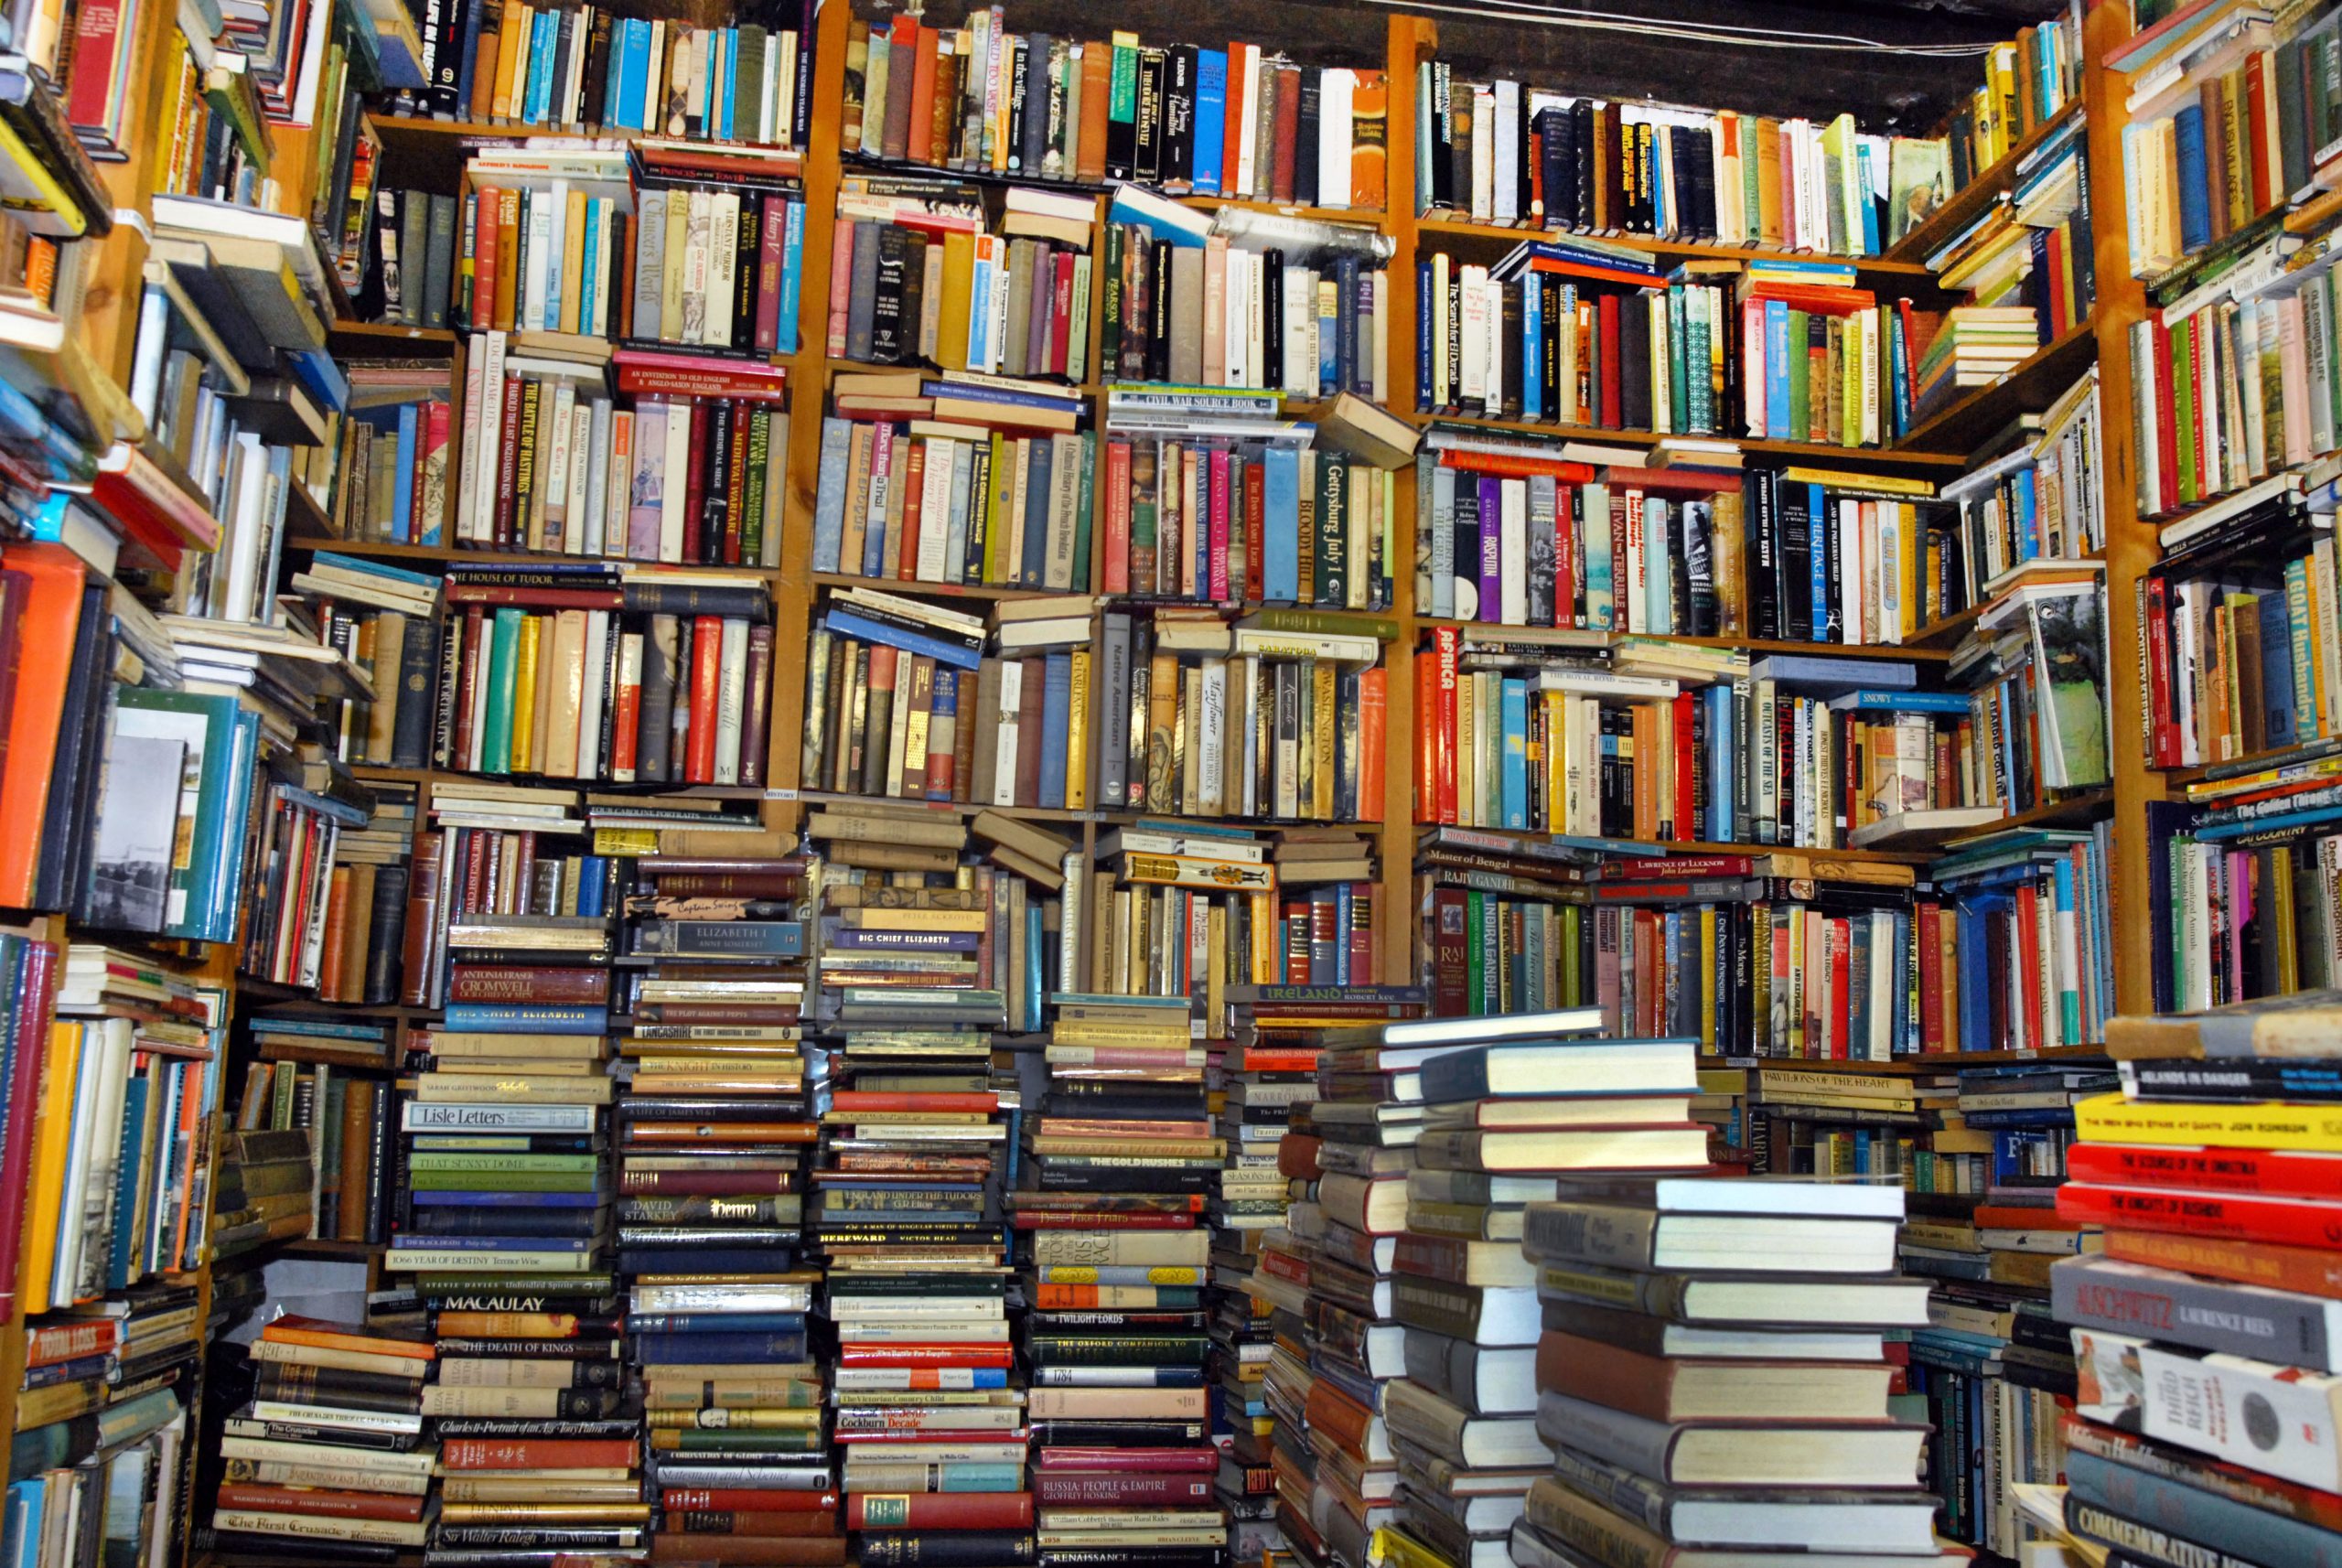 Just how many books are there, really?